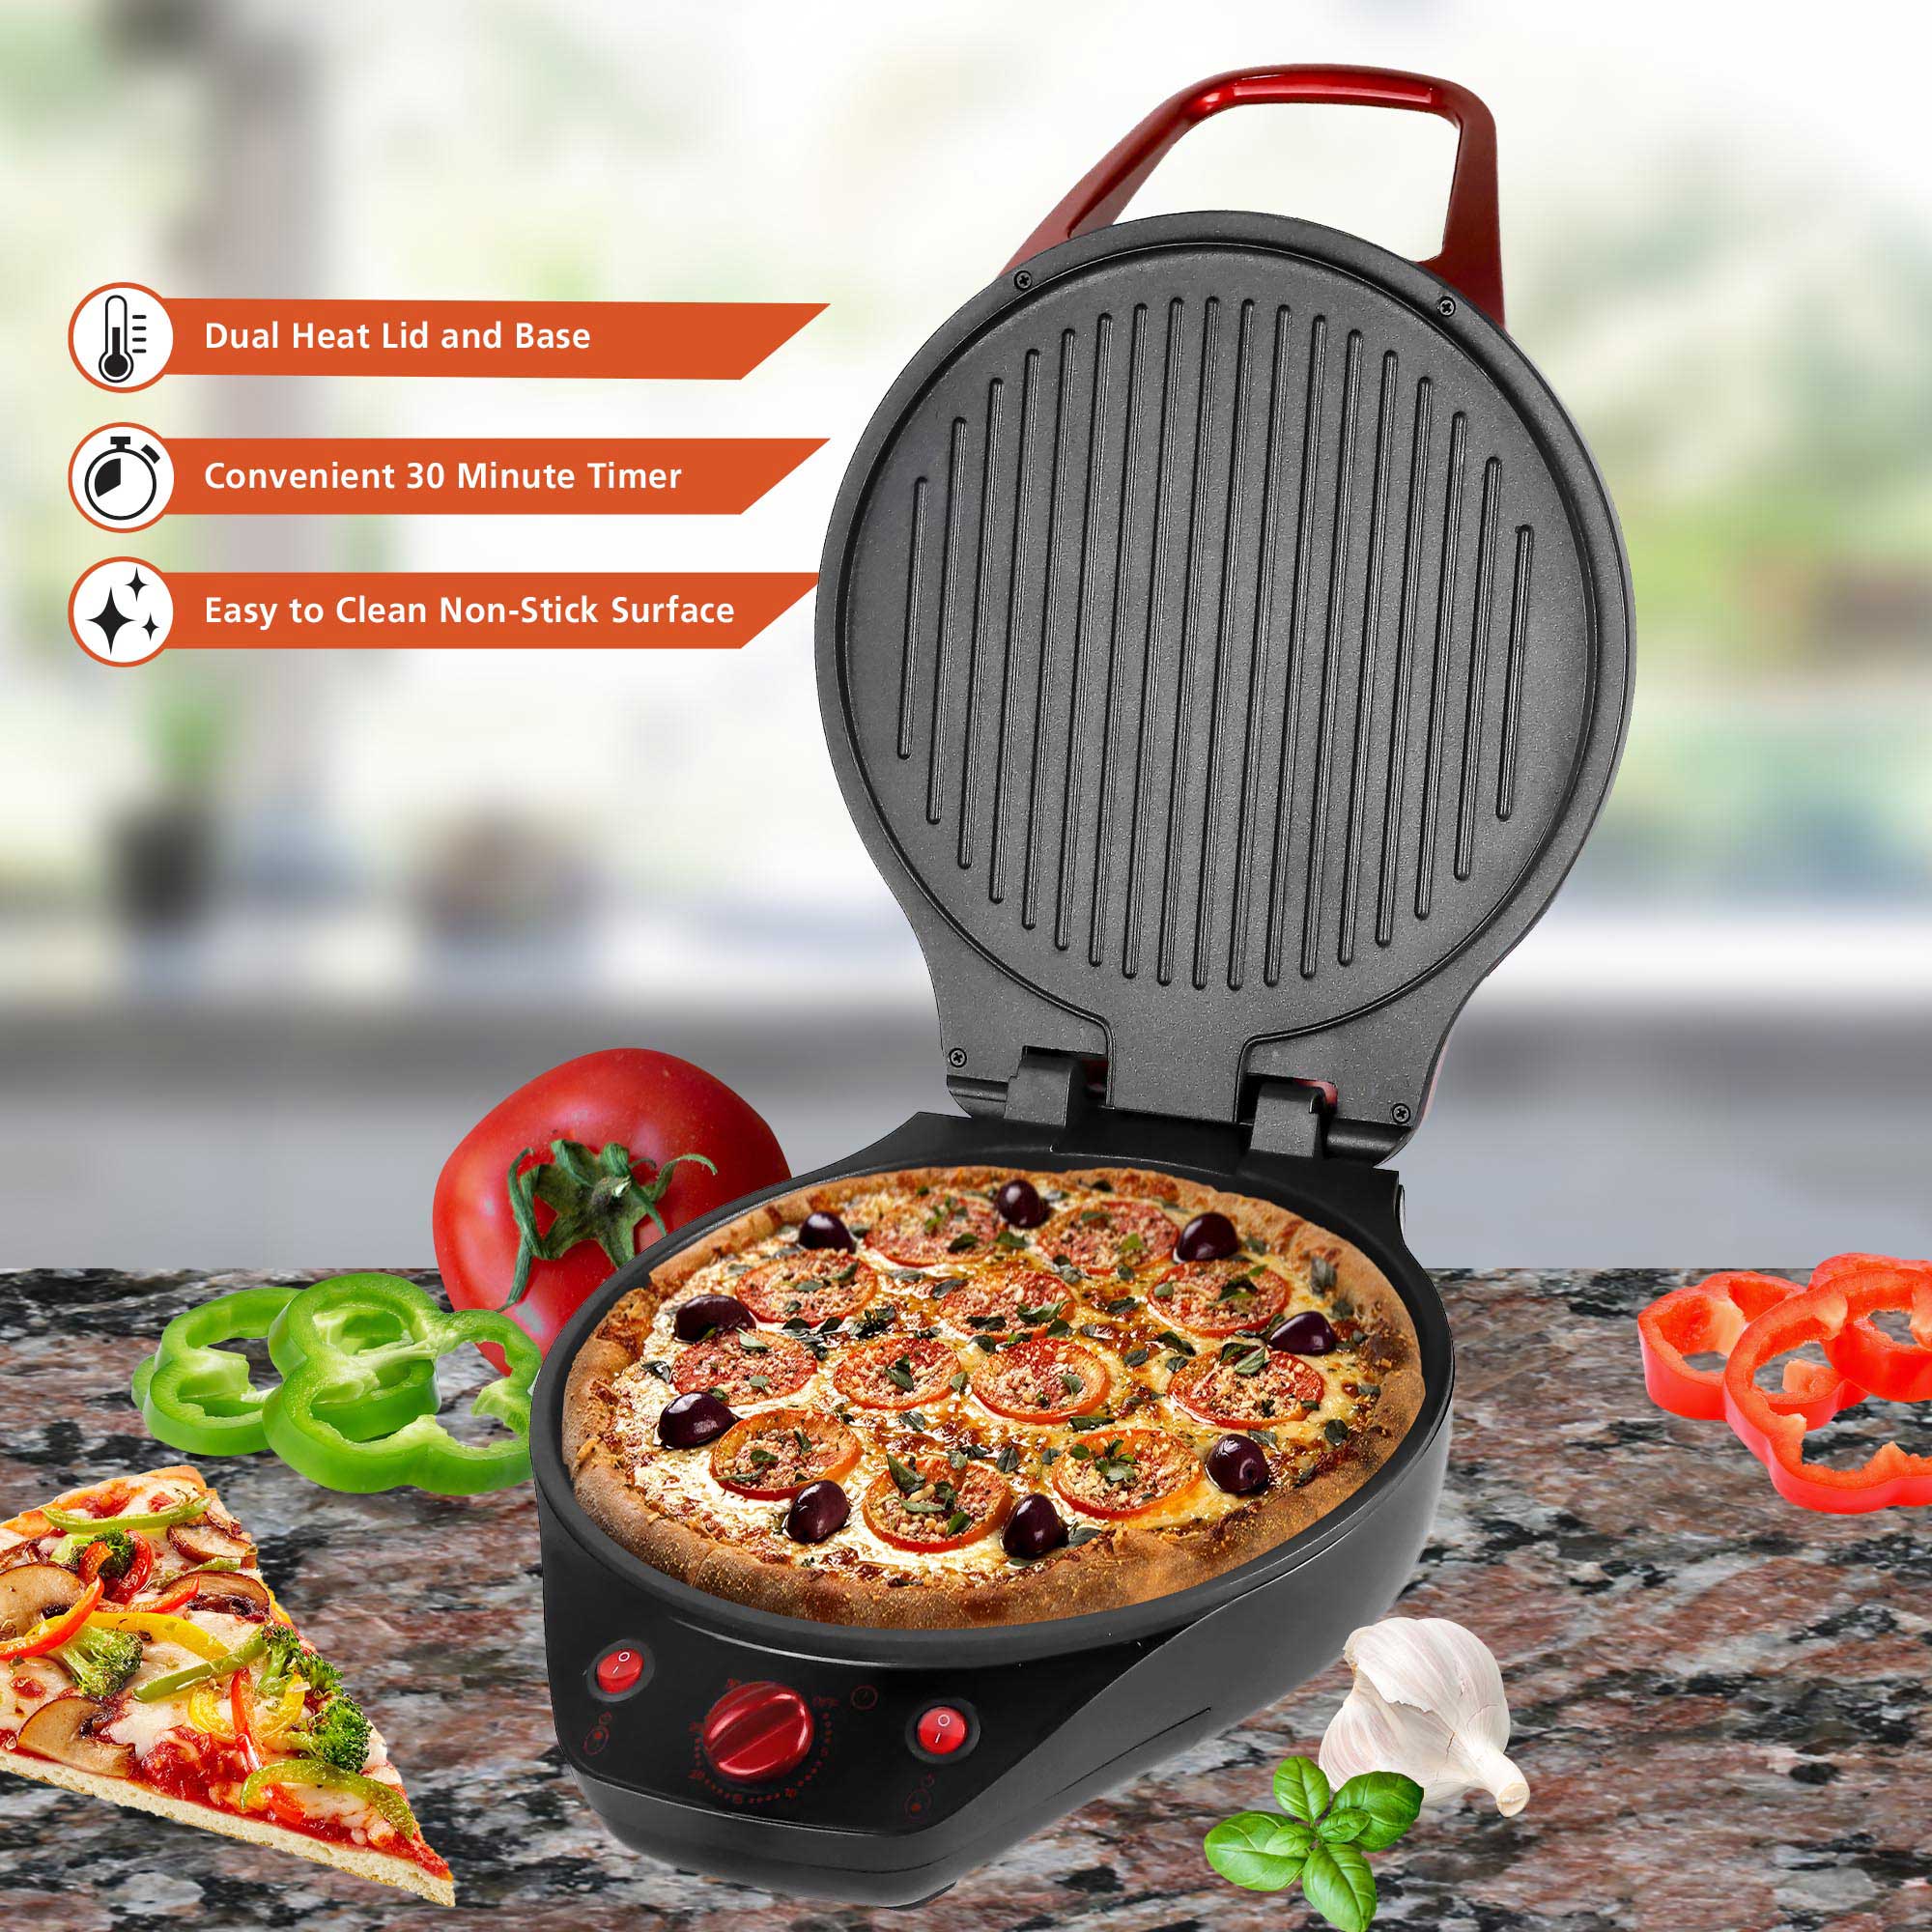 Brentwood TS-124R 12-Inch Non-Stick Pizza Maker and Grill with